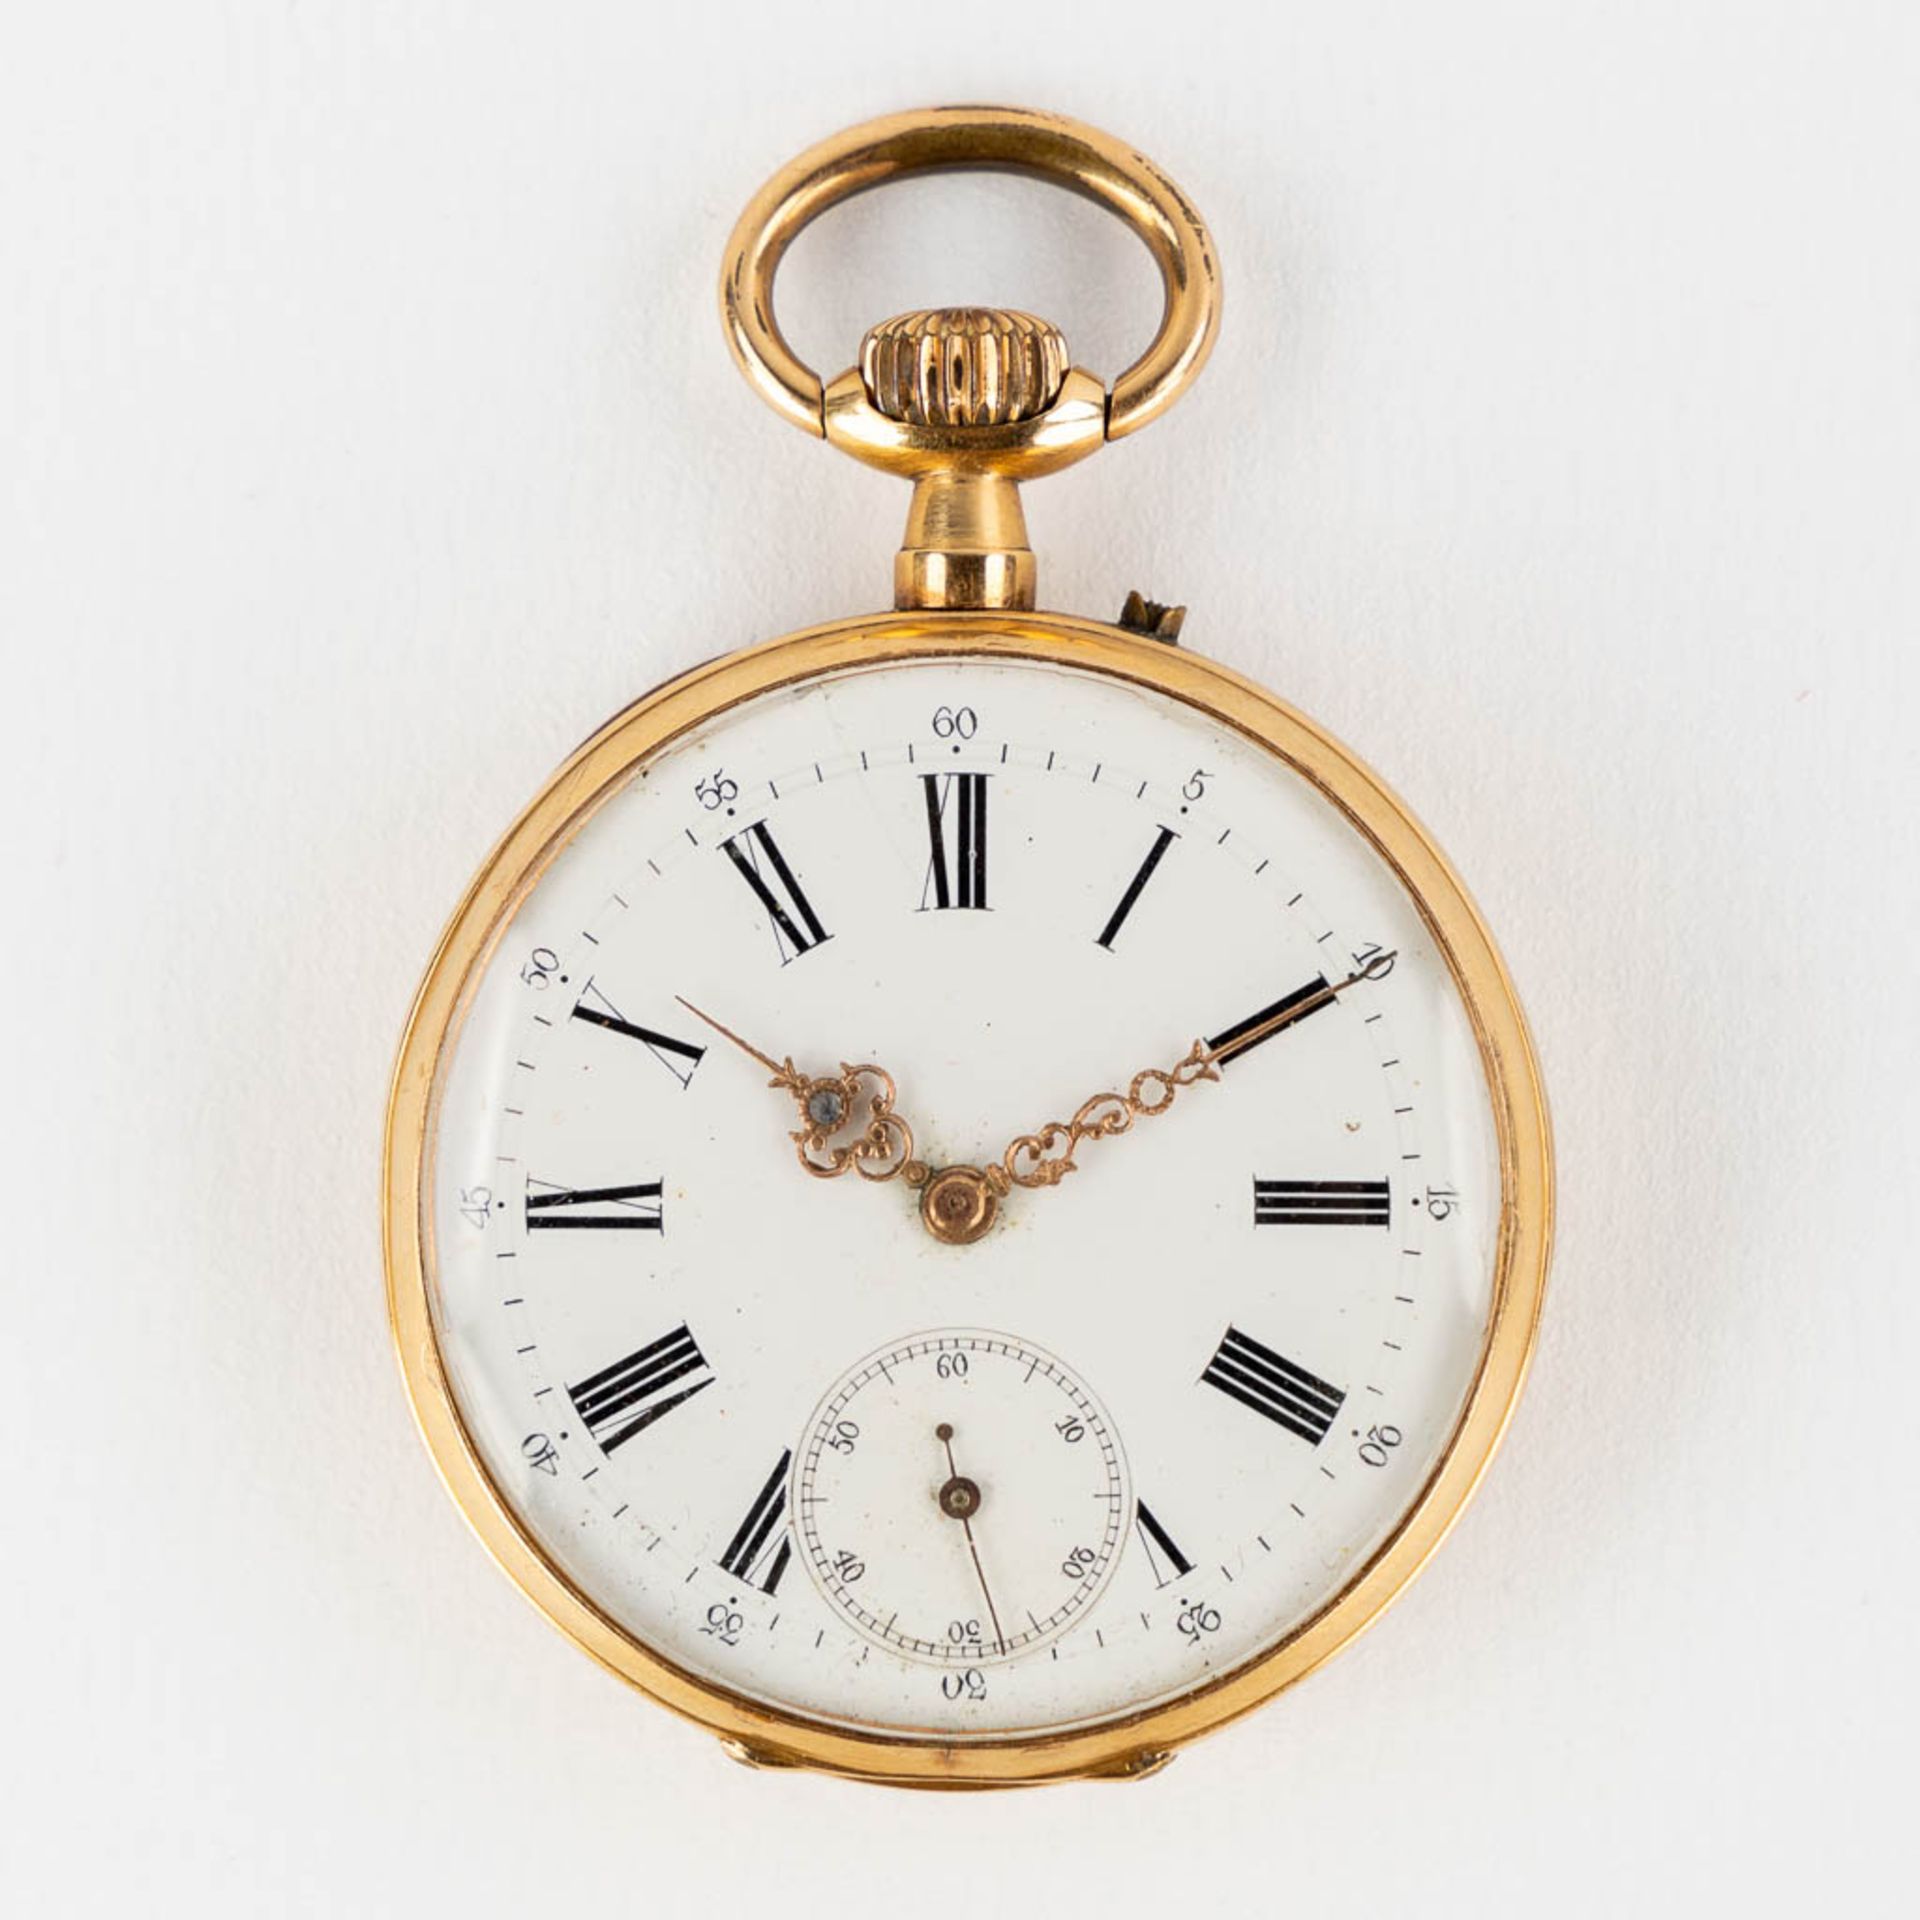 An antique pocket watch, 18kt yellow gold with a white enamel dial. (H:6,3 x D:4,3 cm)